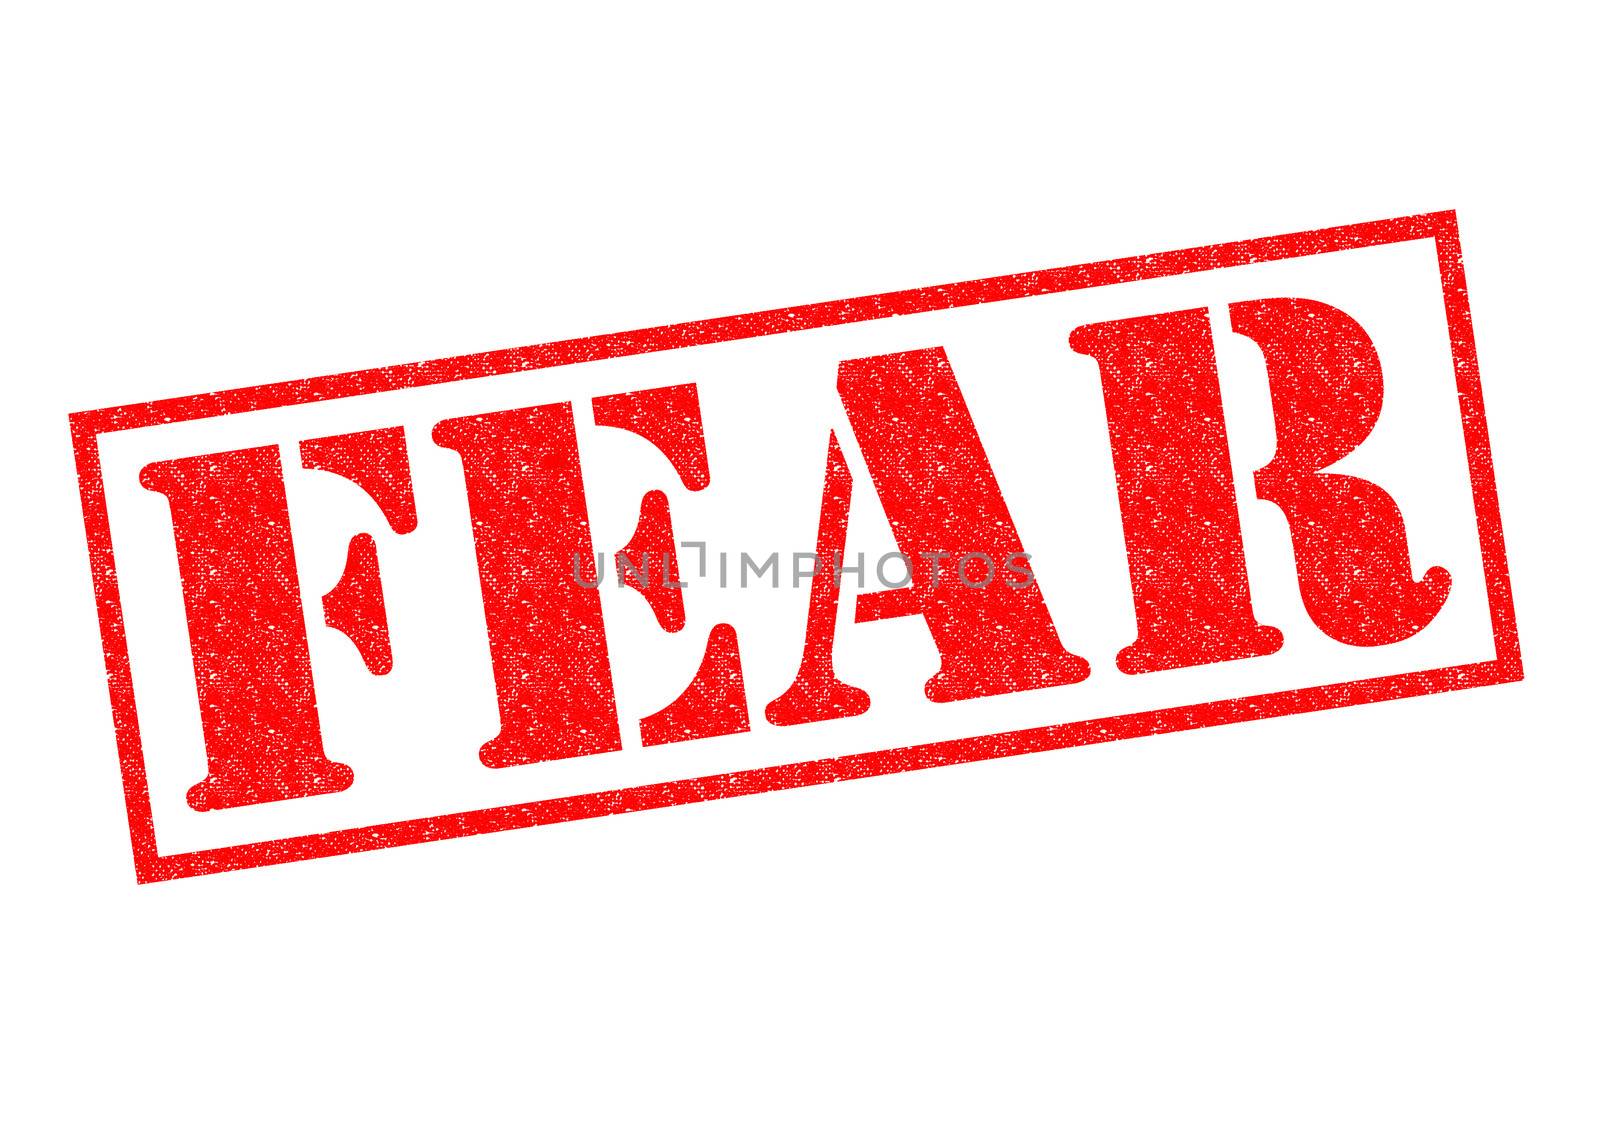 FEAR red Rubber Stamp over a white background.